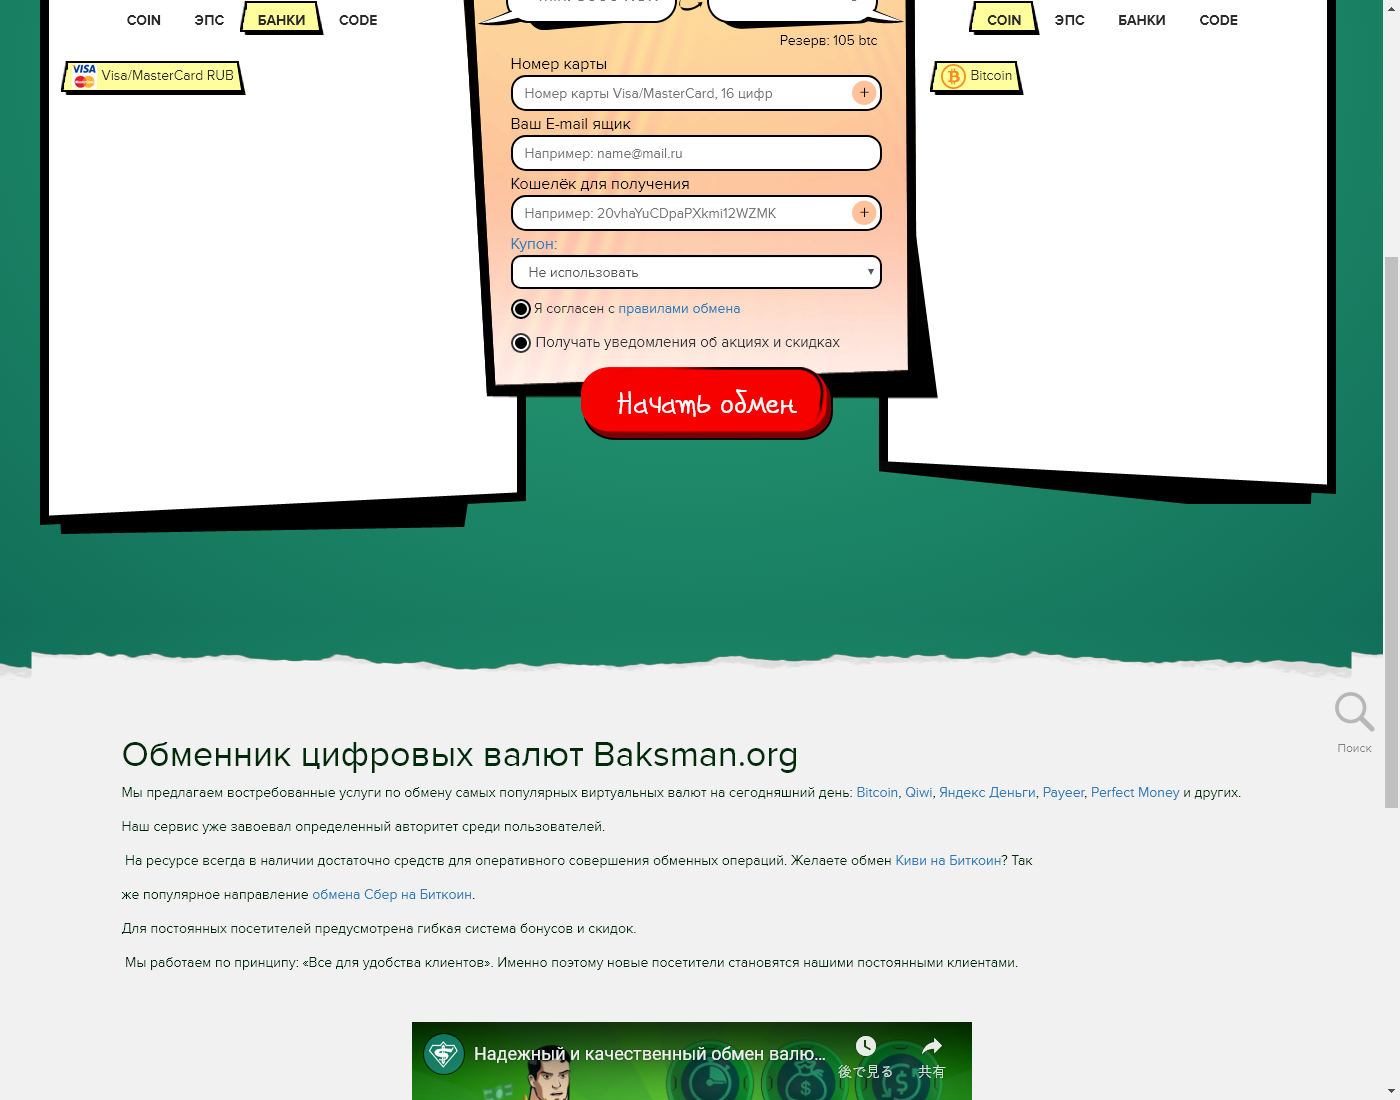 BaksMan user interface: the home page in English